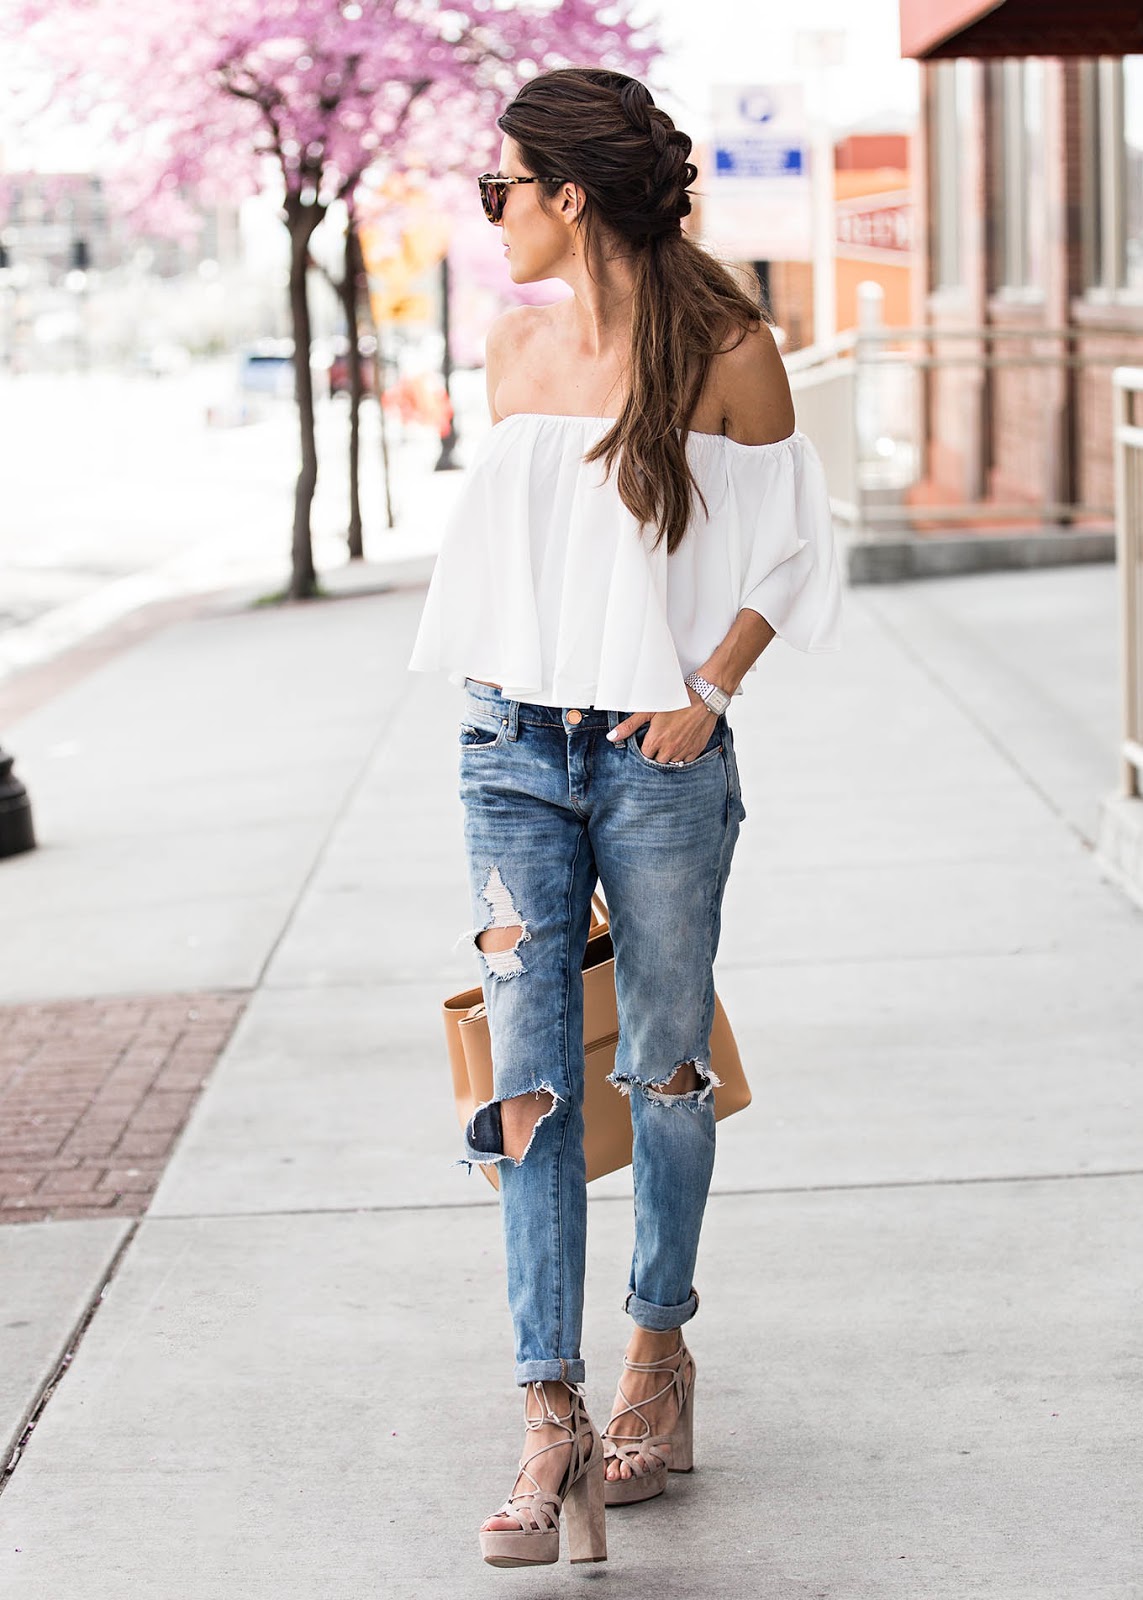 Cute Outfit Ideas For Spring/Summer 2016 | Fashion Newby's